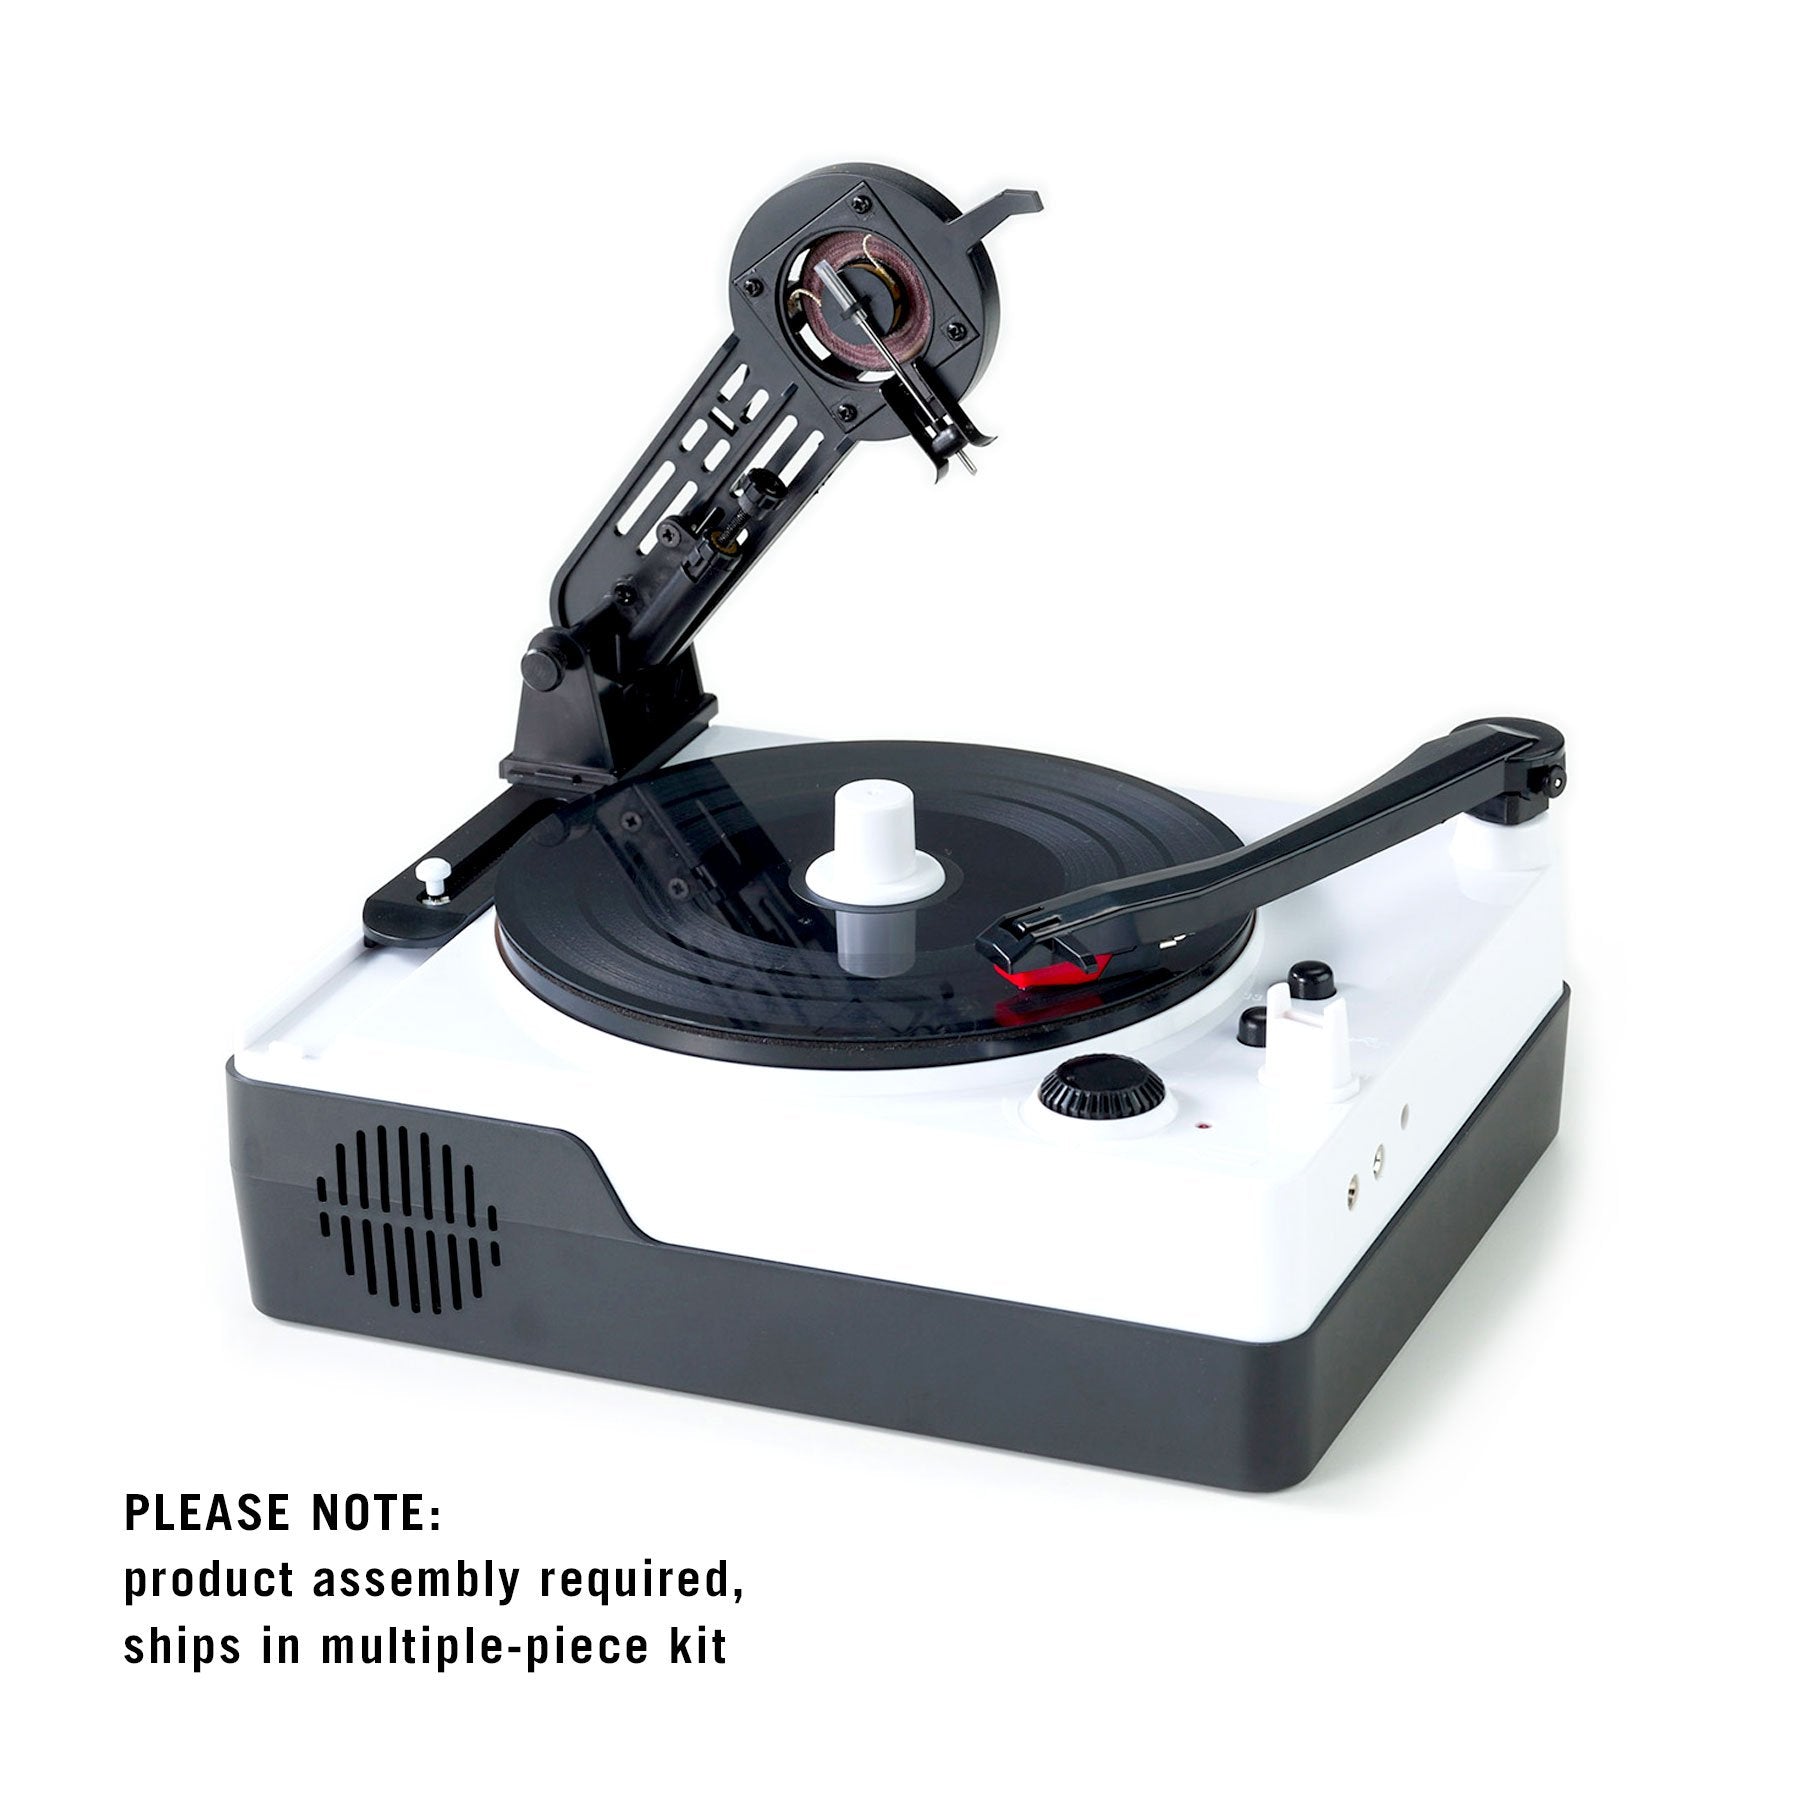 Gakken: Easy Record Maker Toy Kit - Instant Record Cutting (No Returns Accepted, Please Read Terms of Sale Before Purchase)